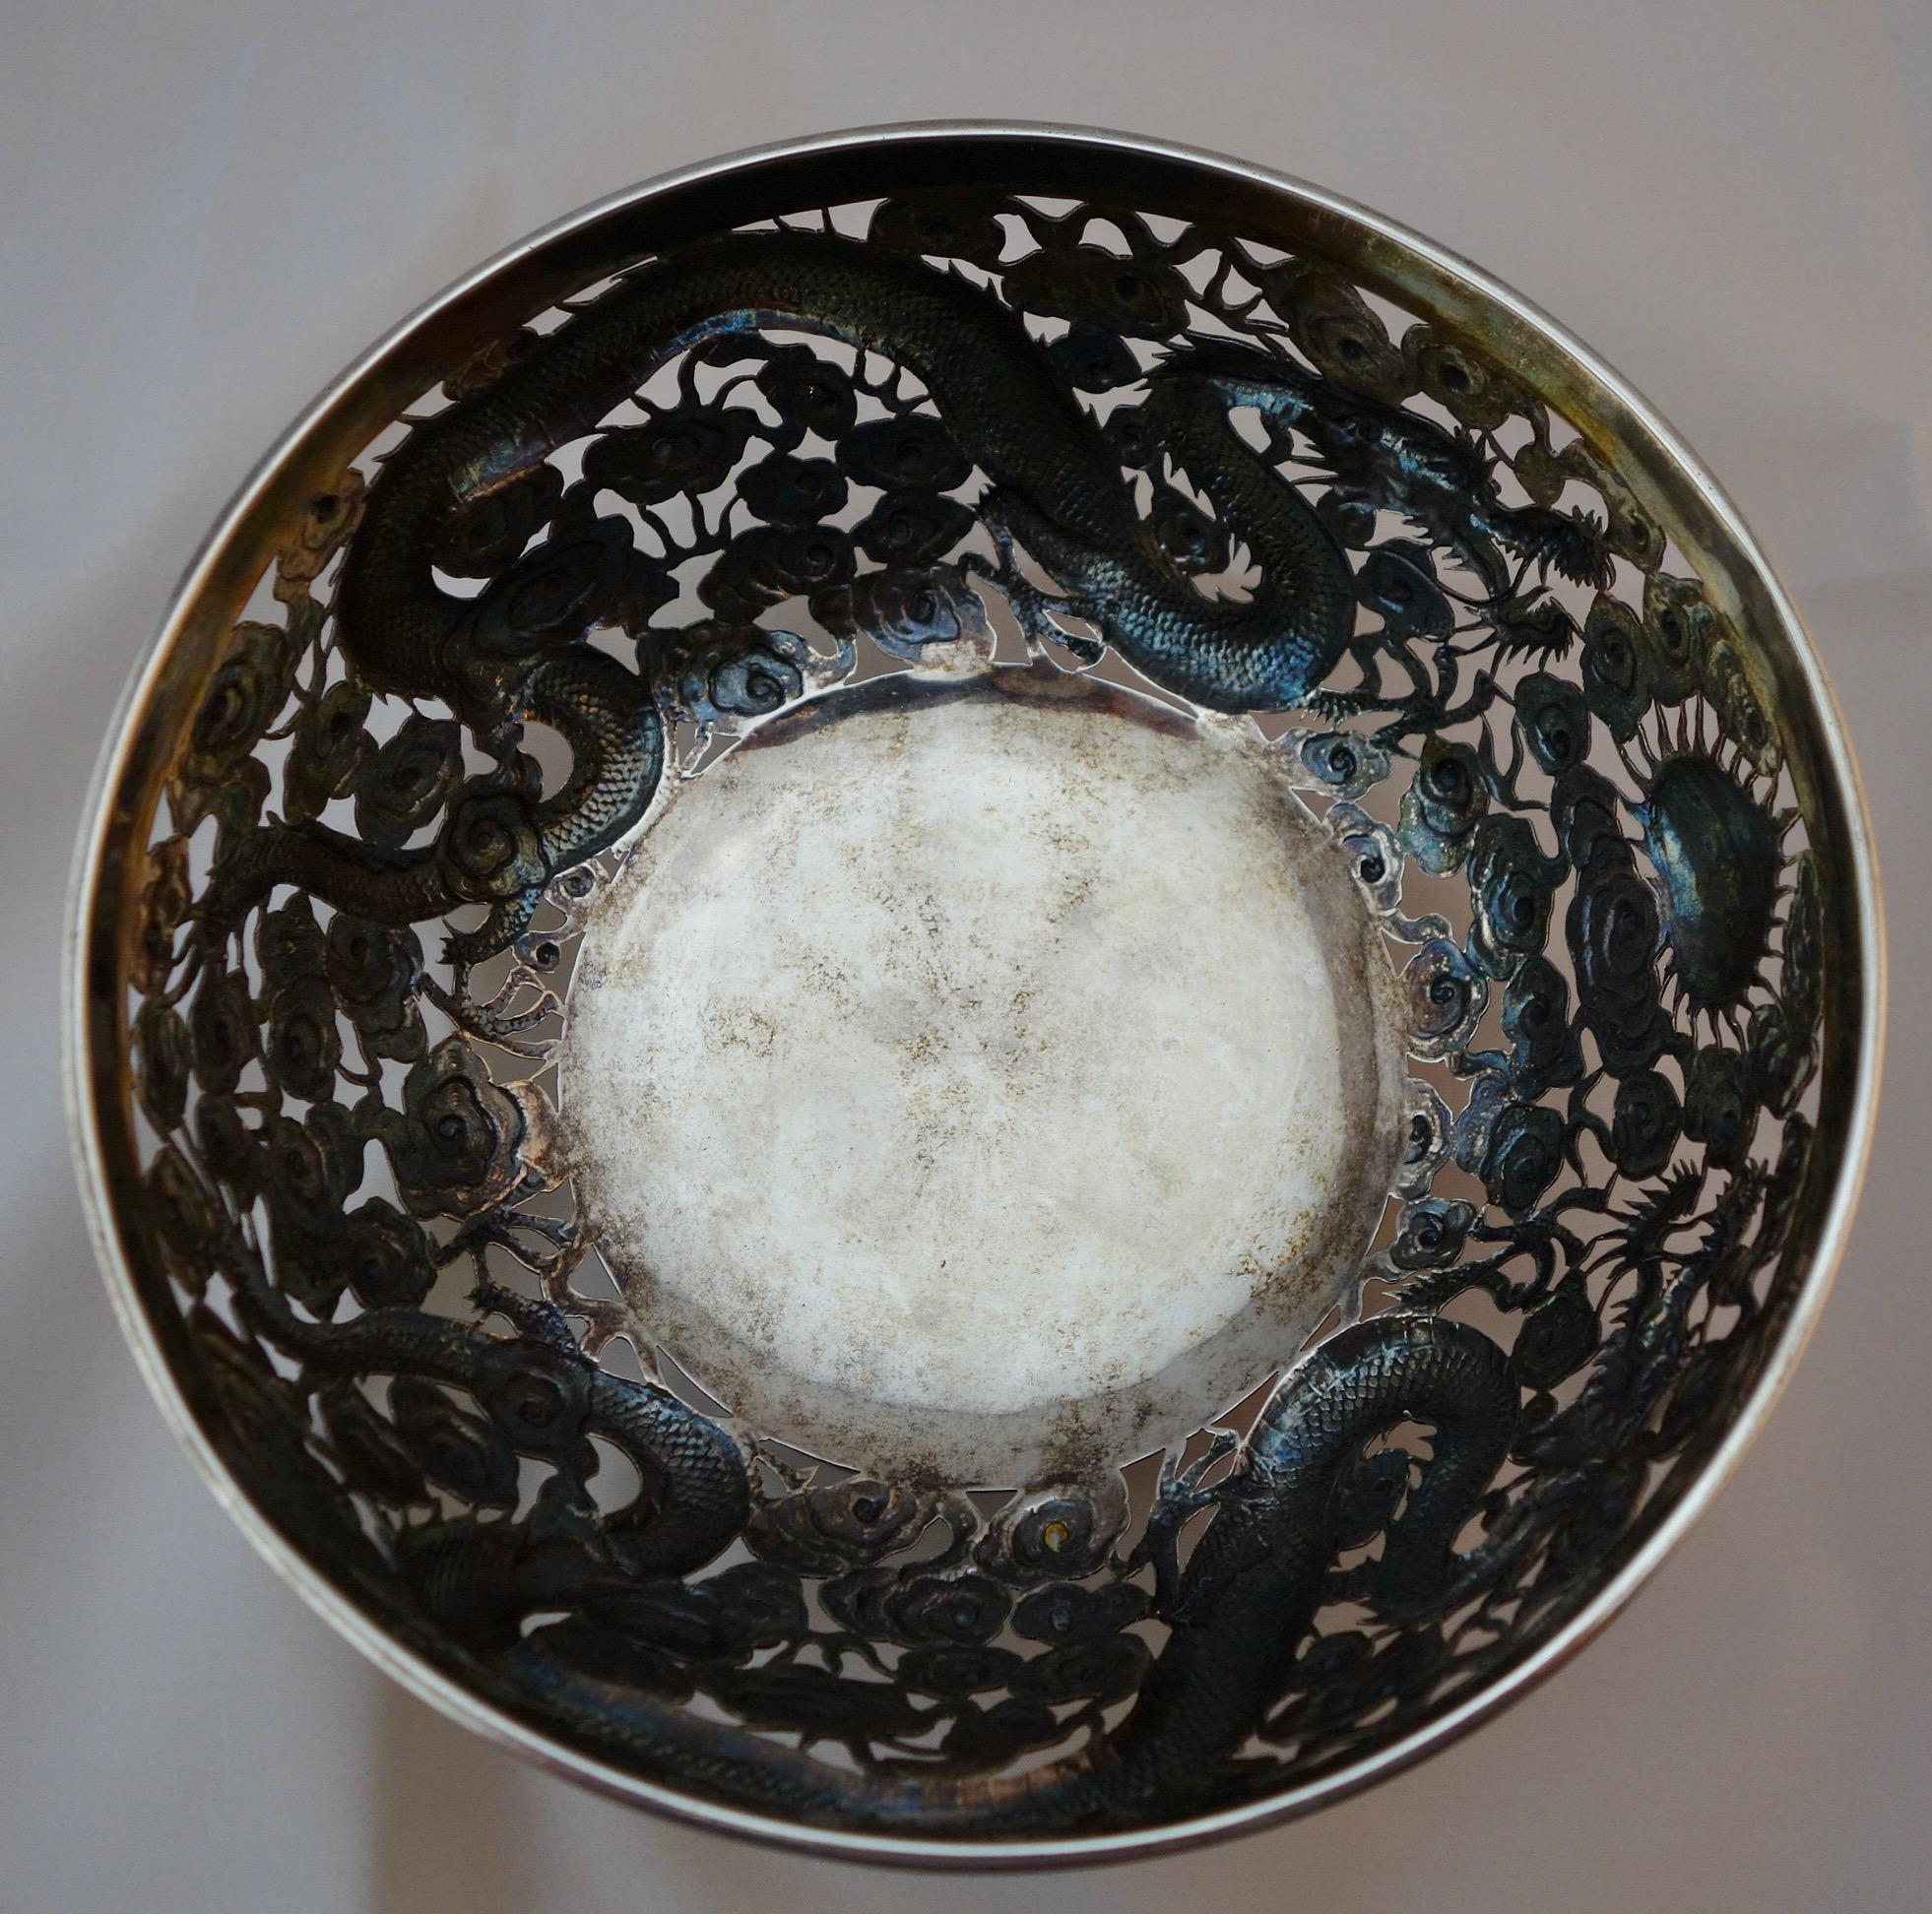 Chinese Export Silver Openwork Dragon Bowl by Wang Hing & Co, Hong Kong, 1890 For Sale 1